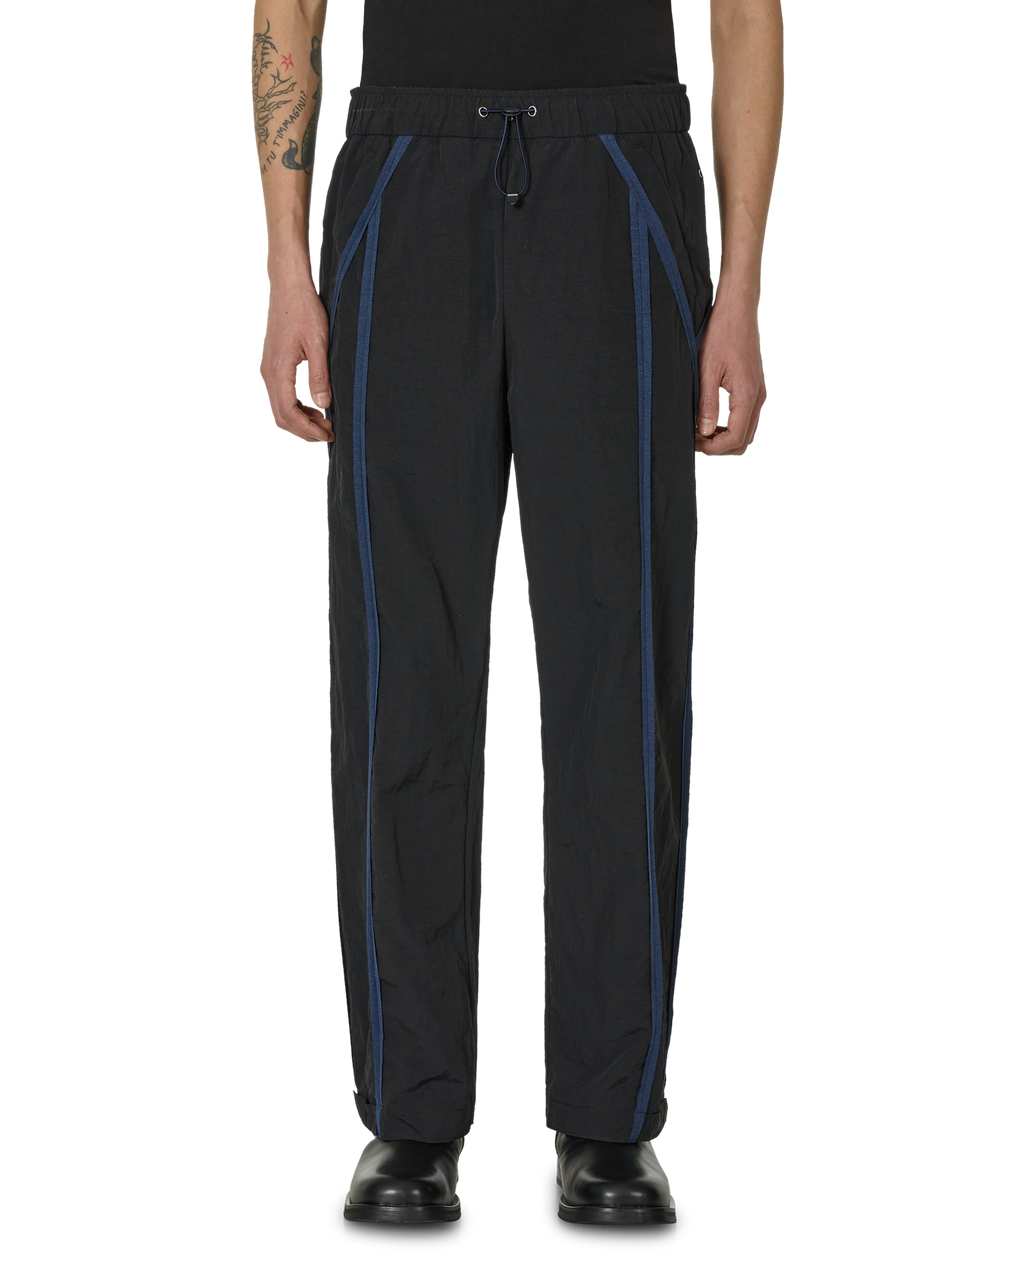 _J.L - A.L_ _J.L-A.L_ x Sound Sports Trackies J297465-S-Black front